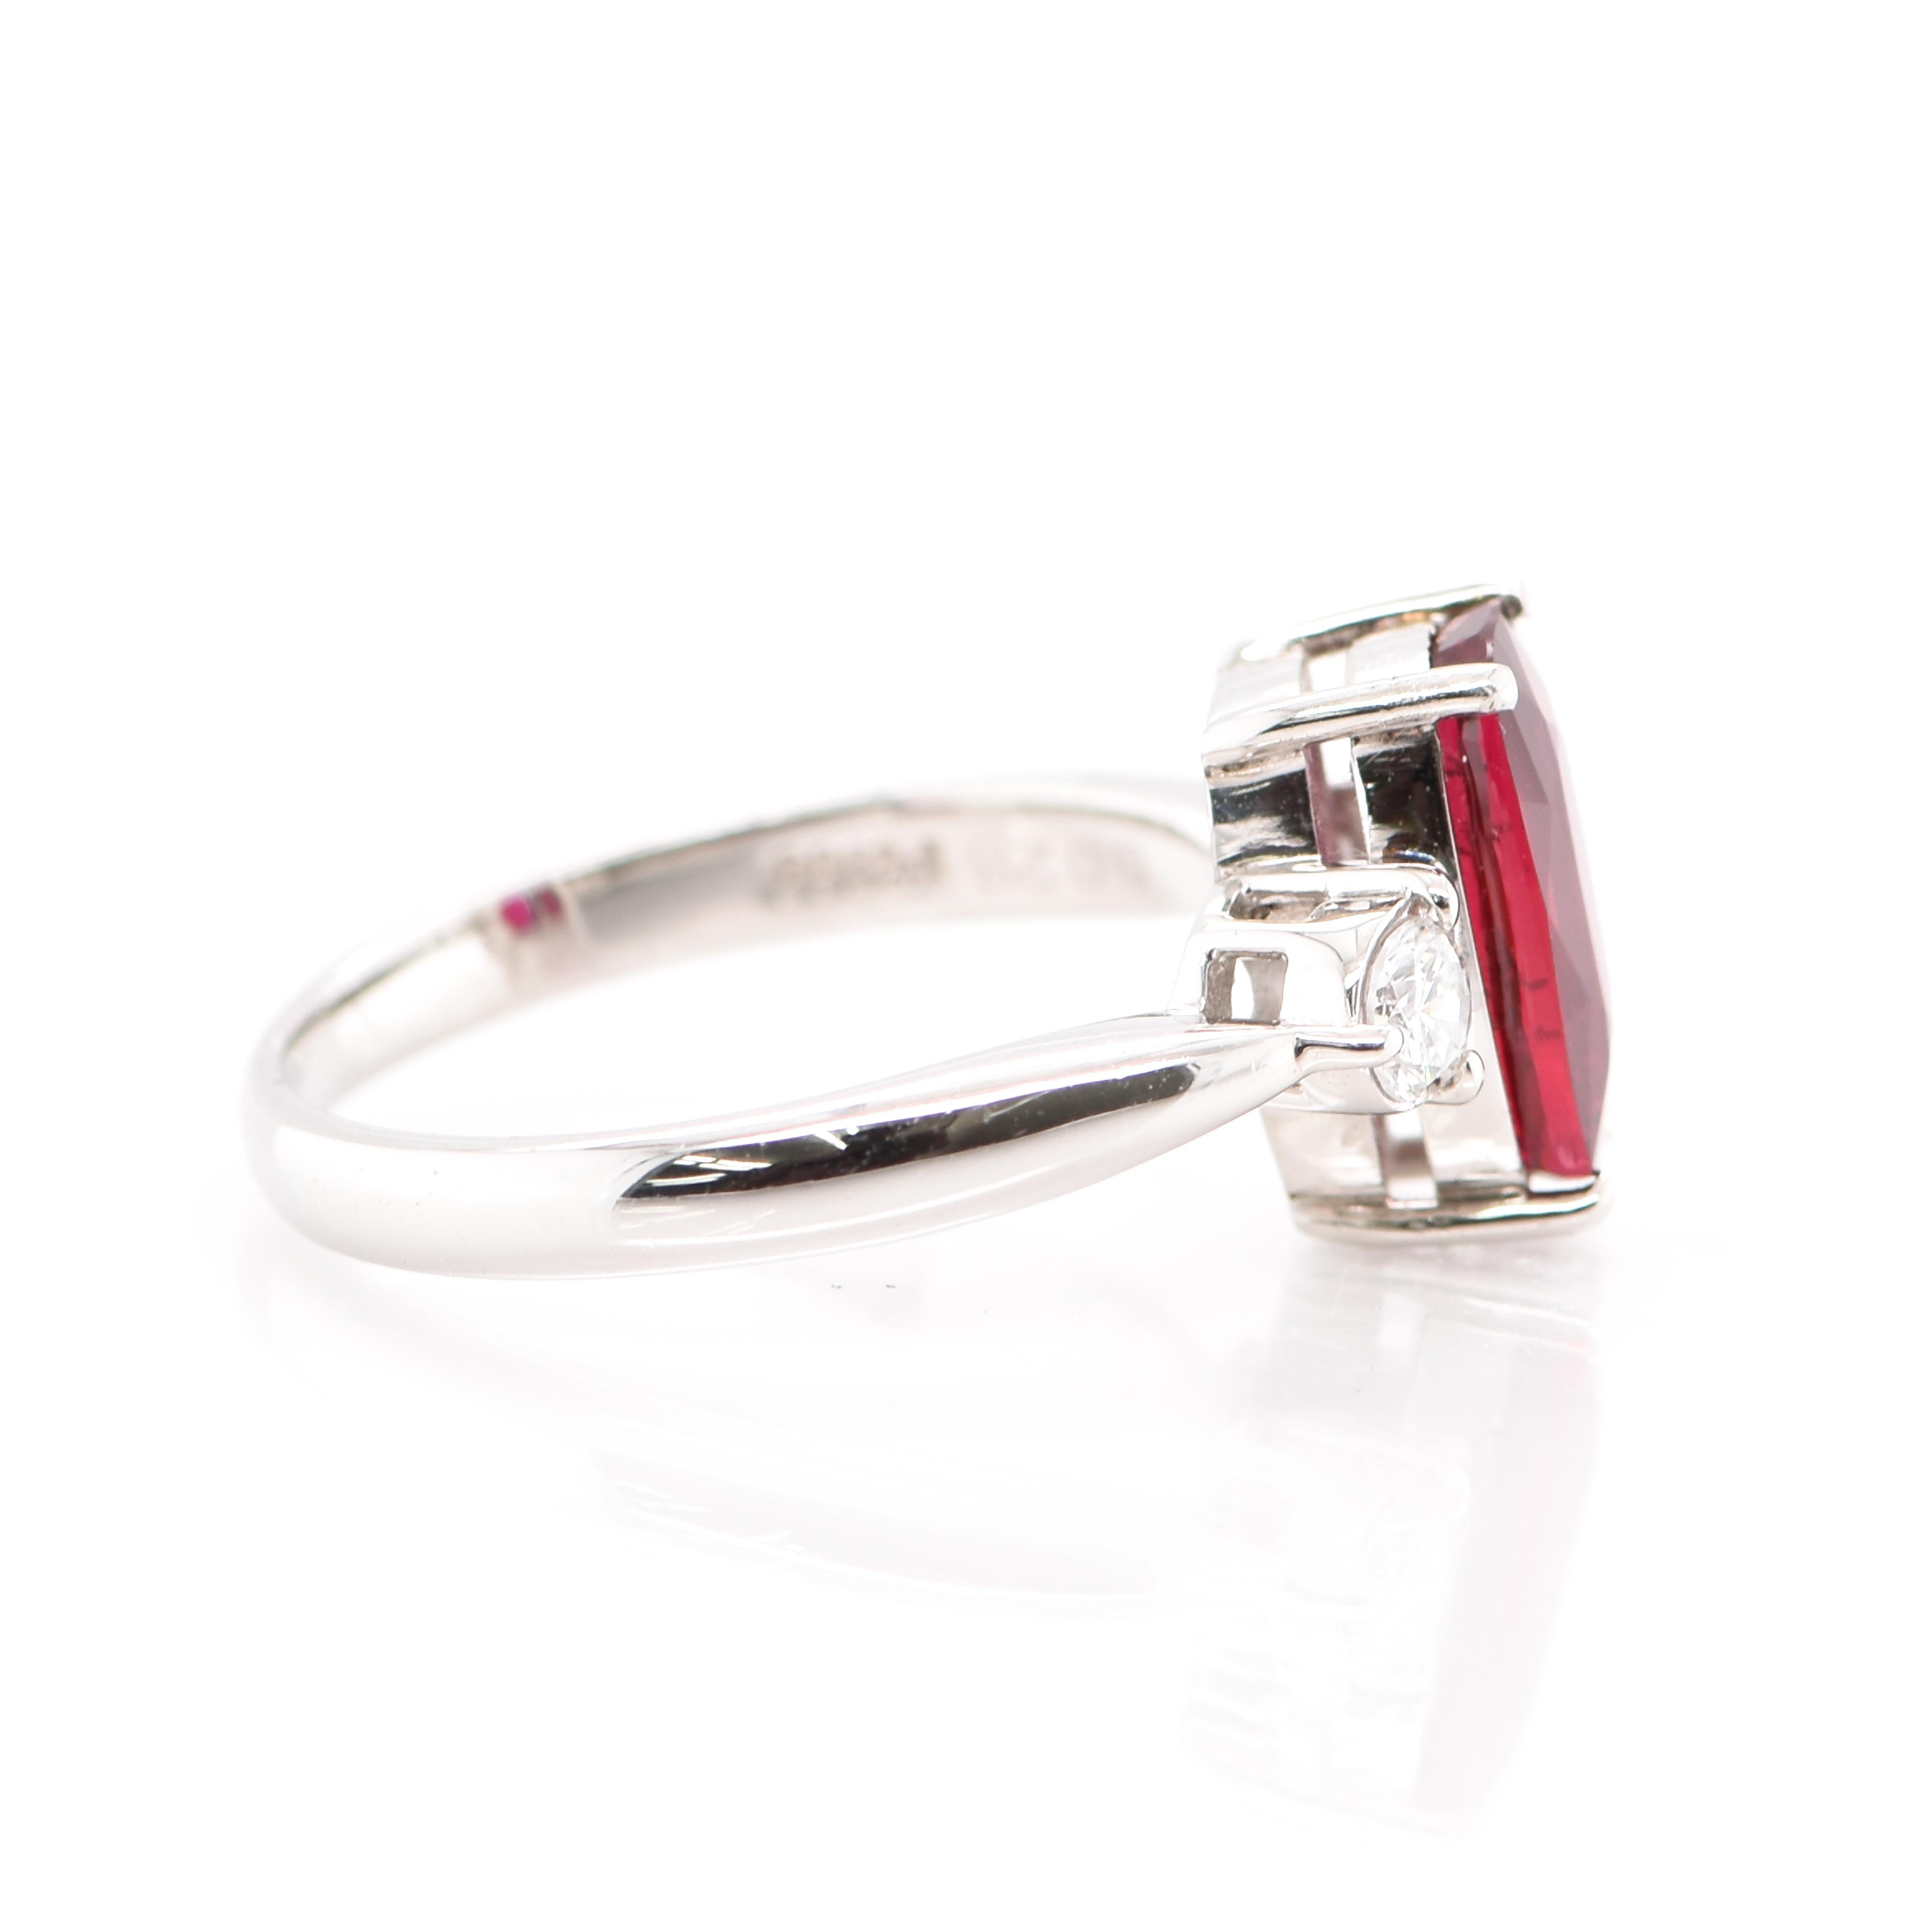 Modern 2.019 Carat Untreated, Mozambique Ruby and Diamond Ring Set in Platinum